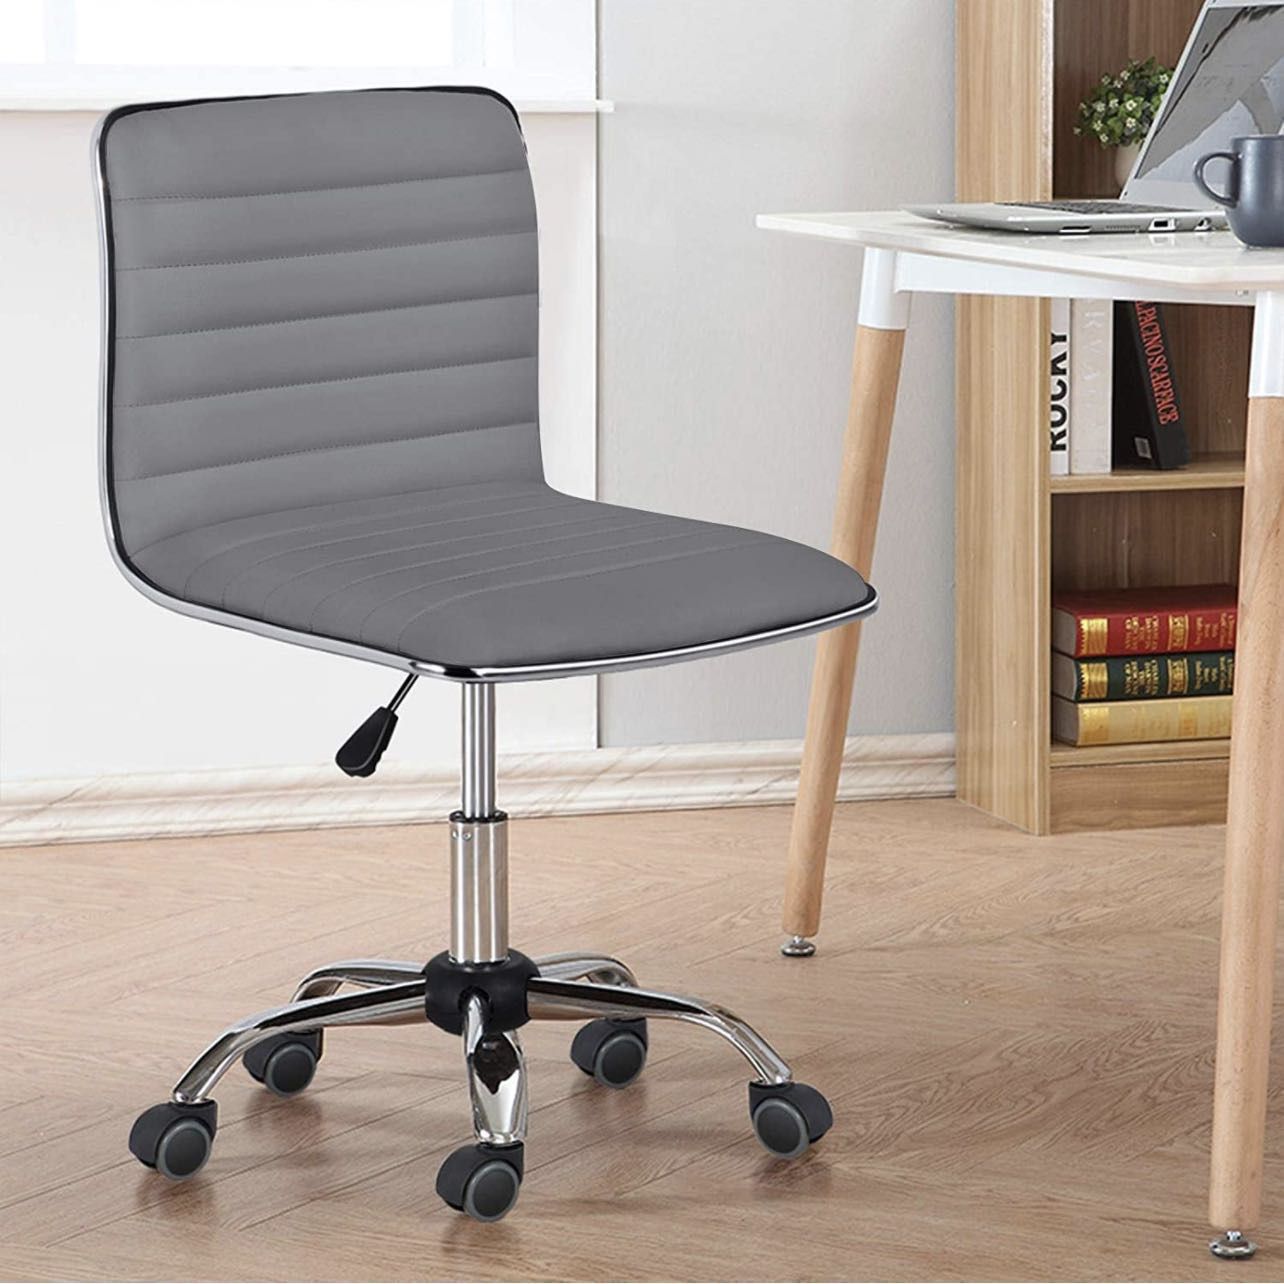 PU Leather Office Chair Task Chair, Ribbed Armless Desk Chair, Adjustable Low Back Executive Chair with Wheels Grey591530